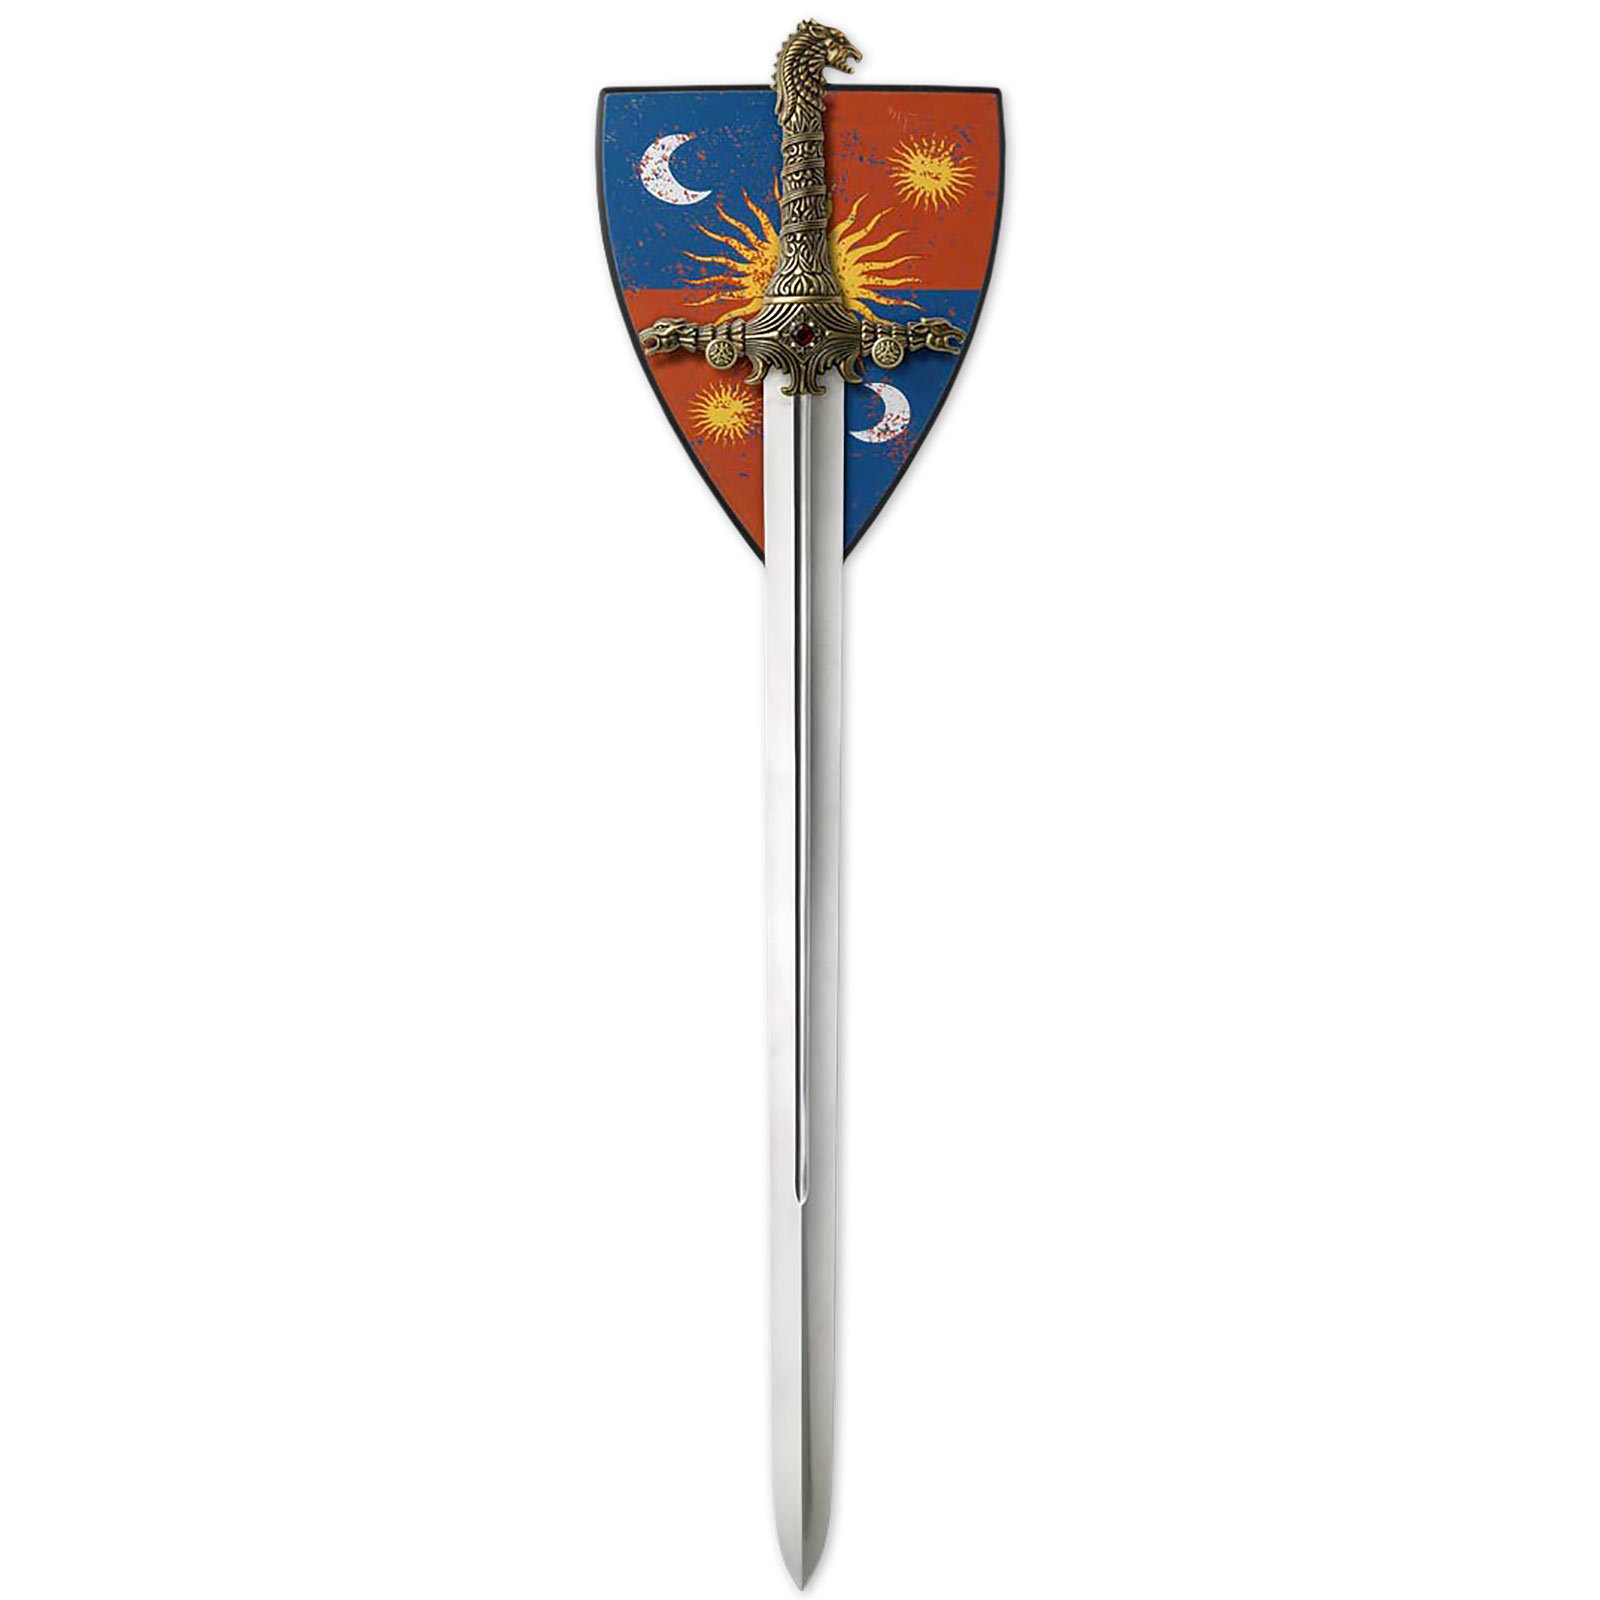 Game of Thrones - Brienne Of Tarth's Sword Oathkeeper